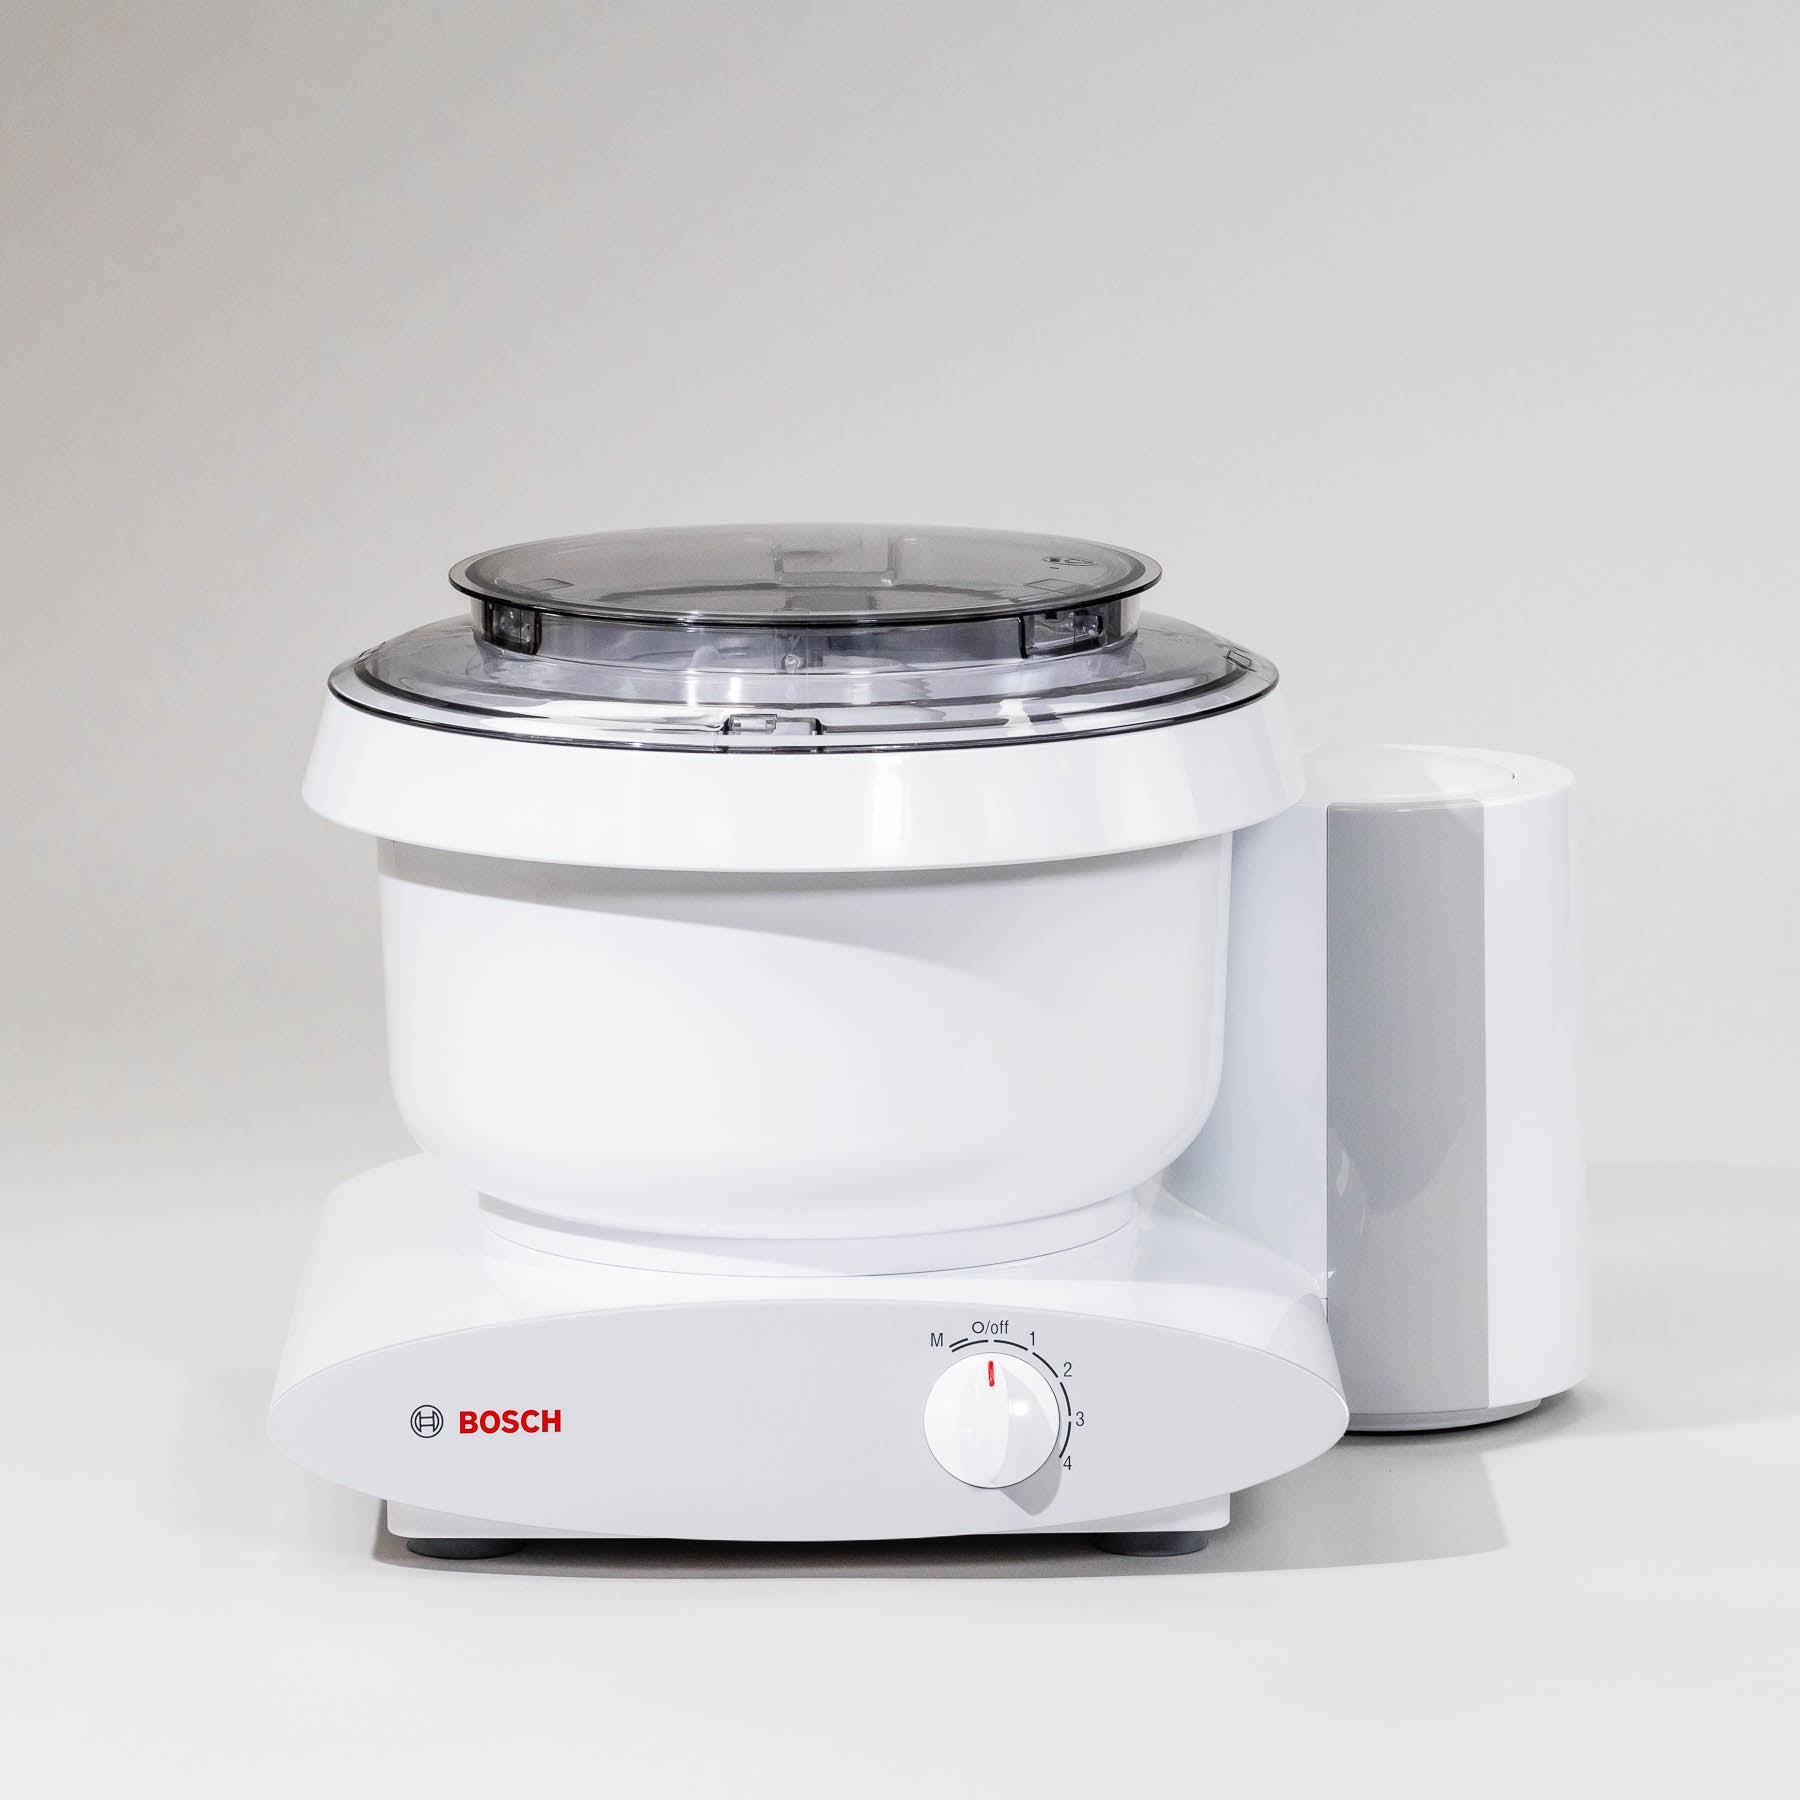 Bosch Mixers on Sale with FREE Accessories + Free Shipping